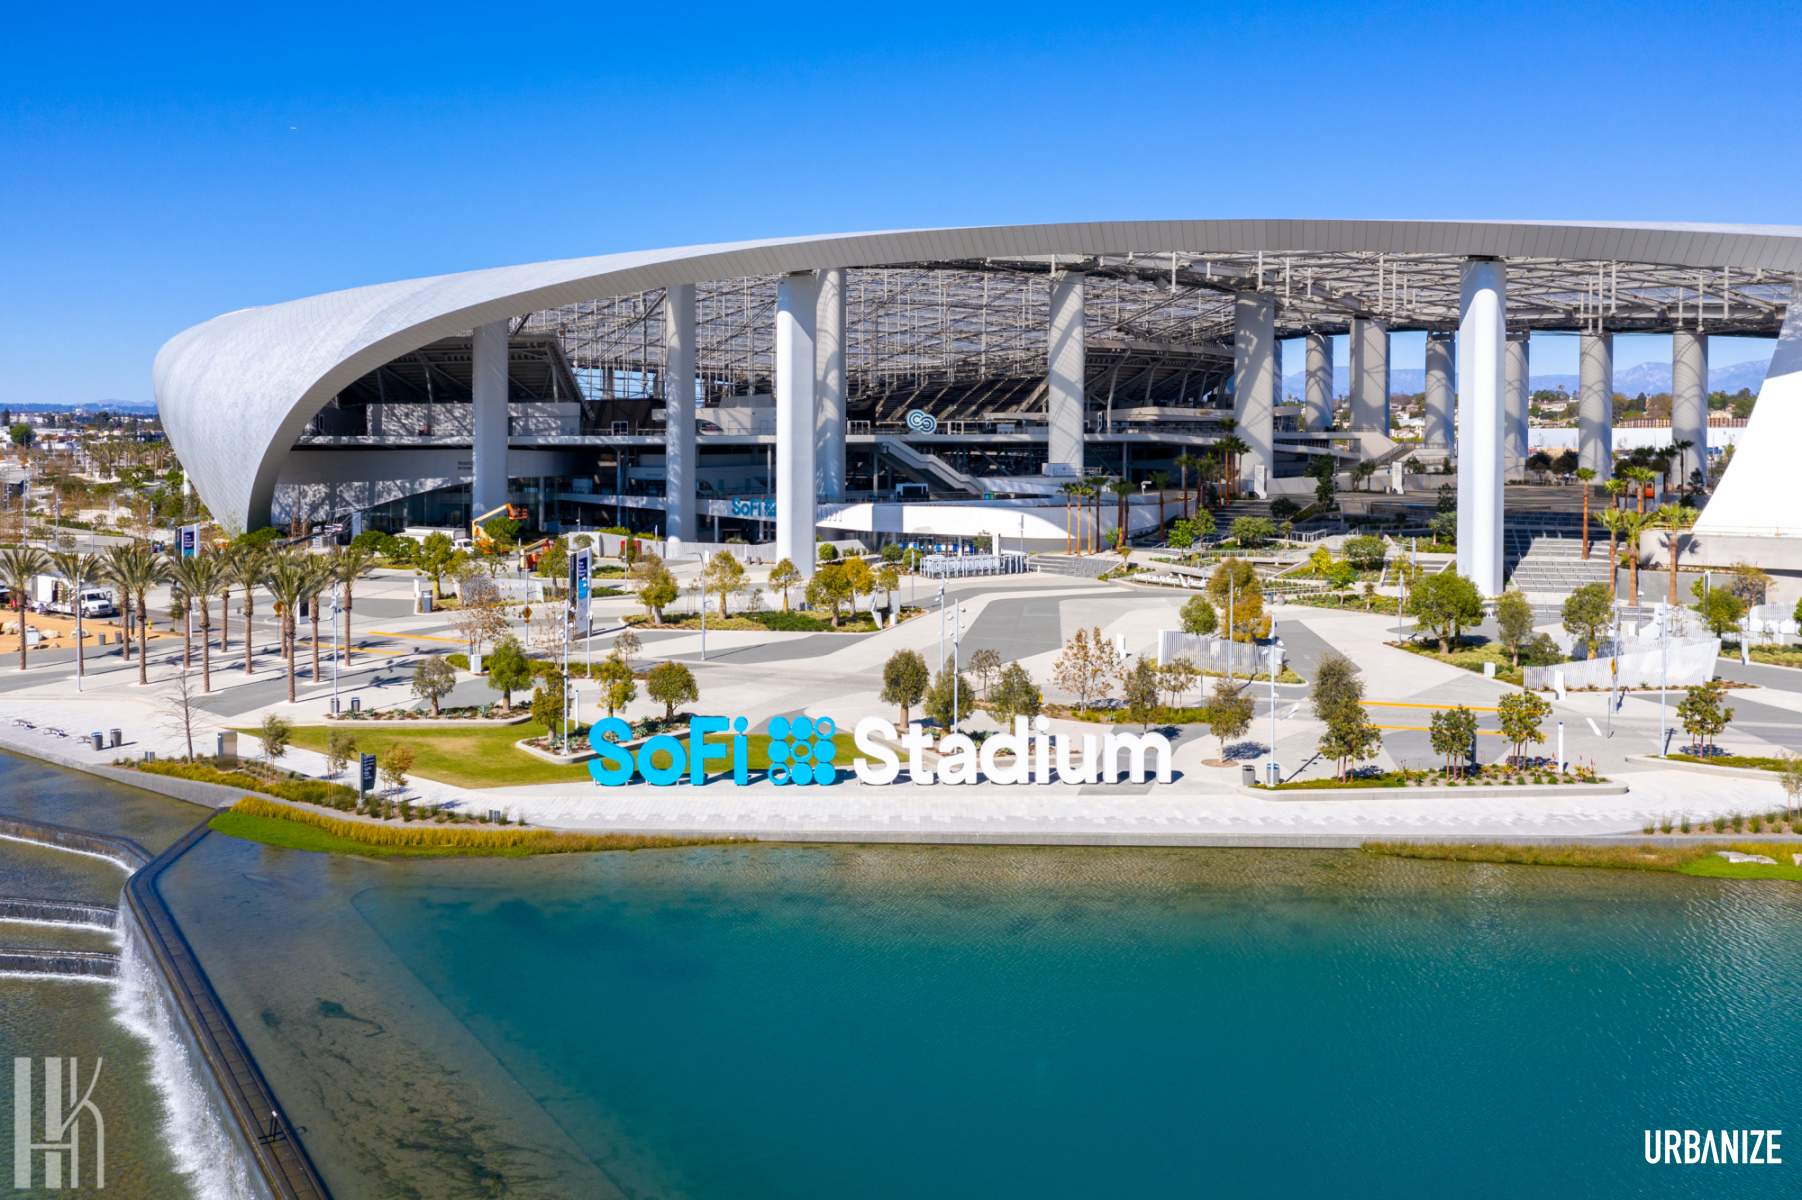 Inglewood's Transformation: How an NFL Stadium Brought the City